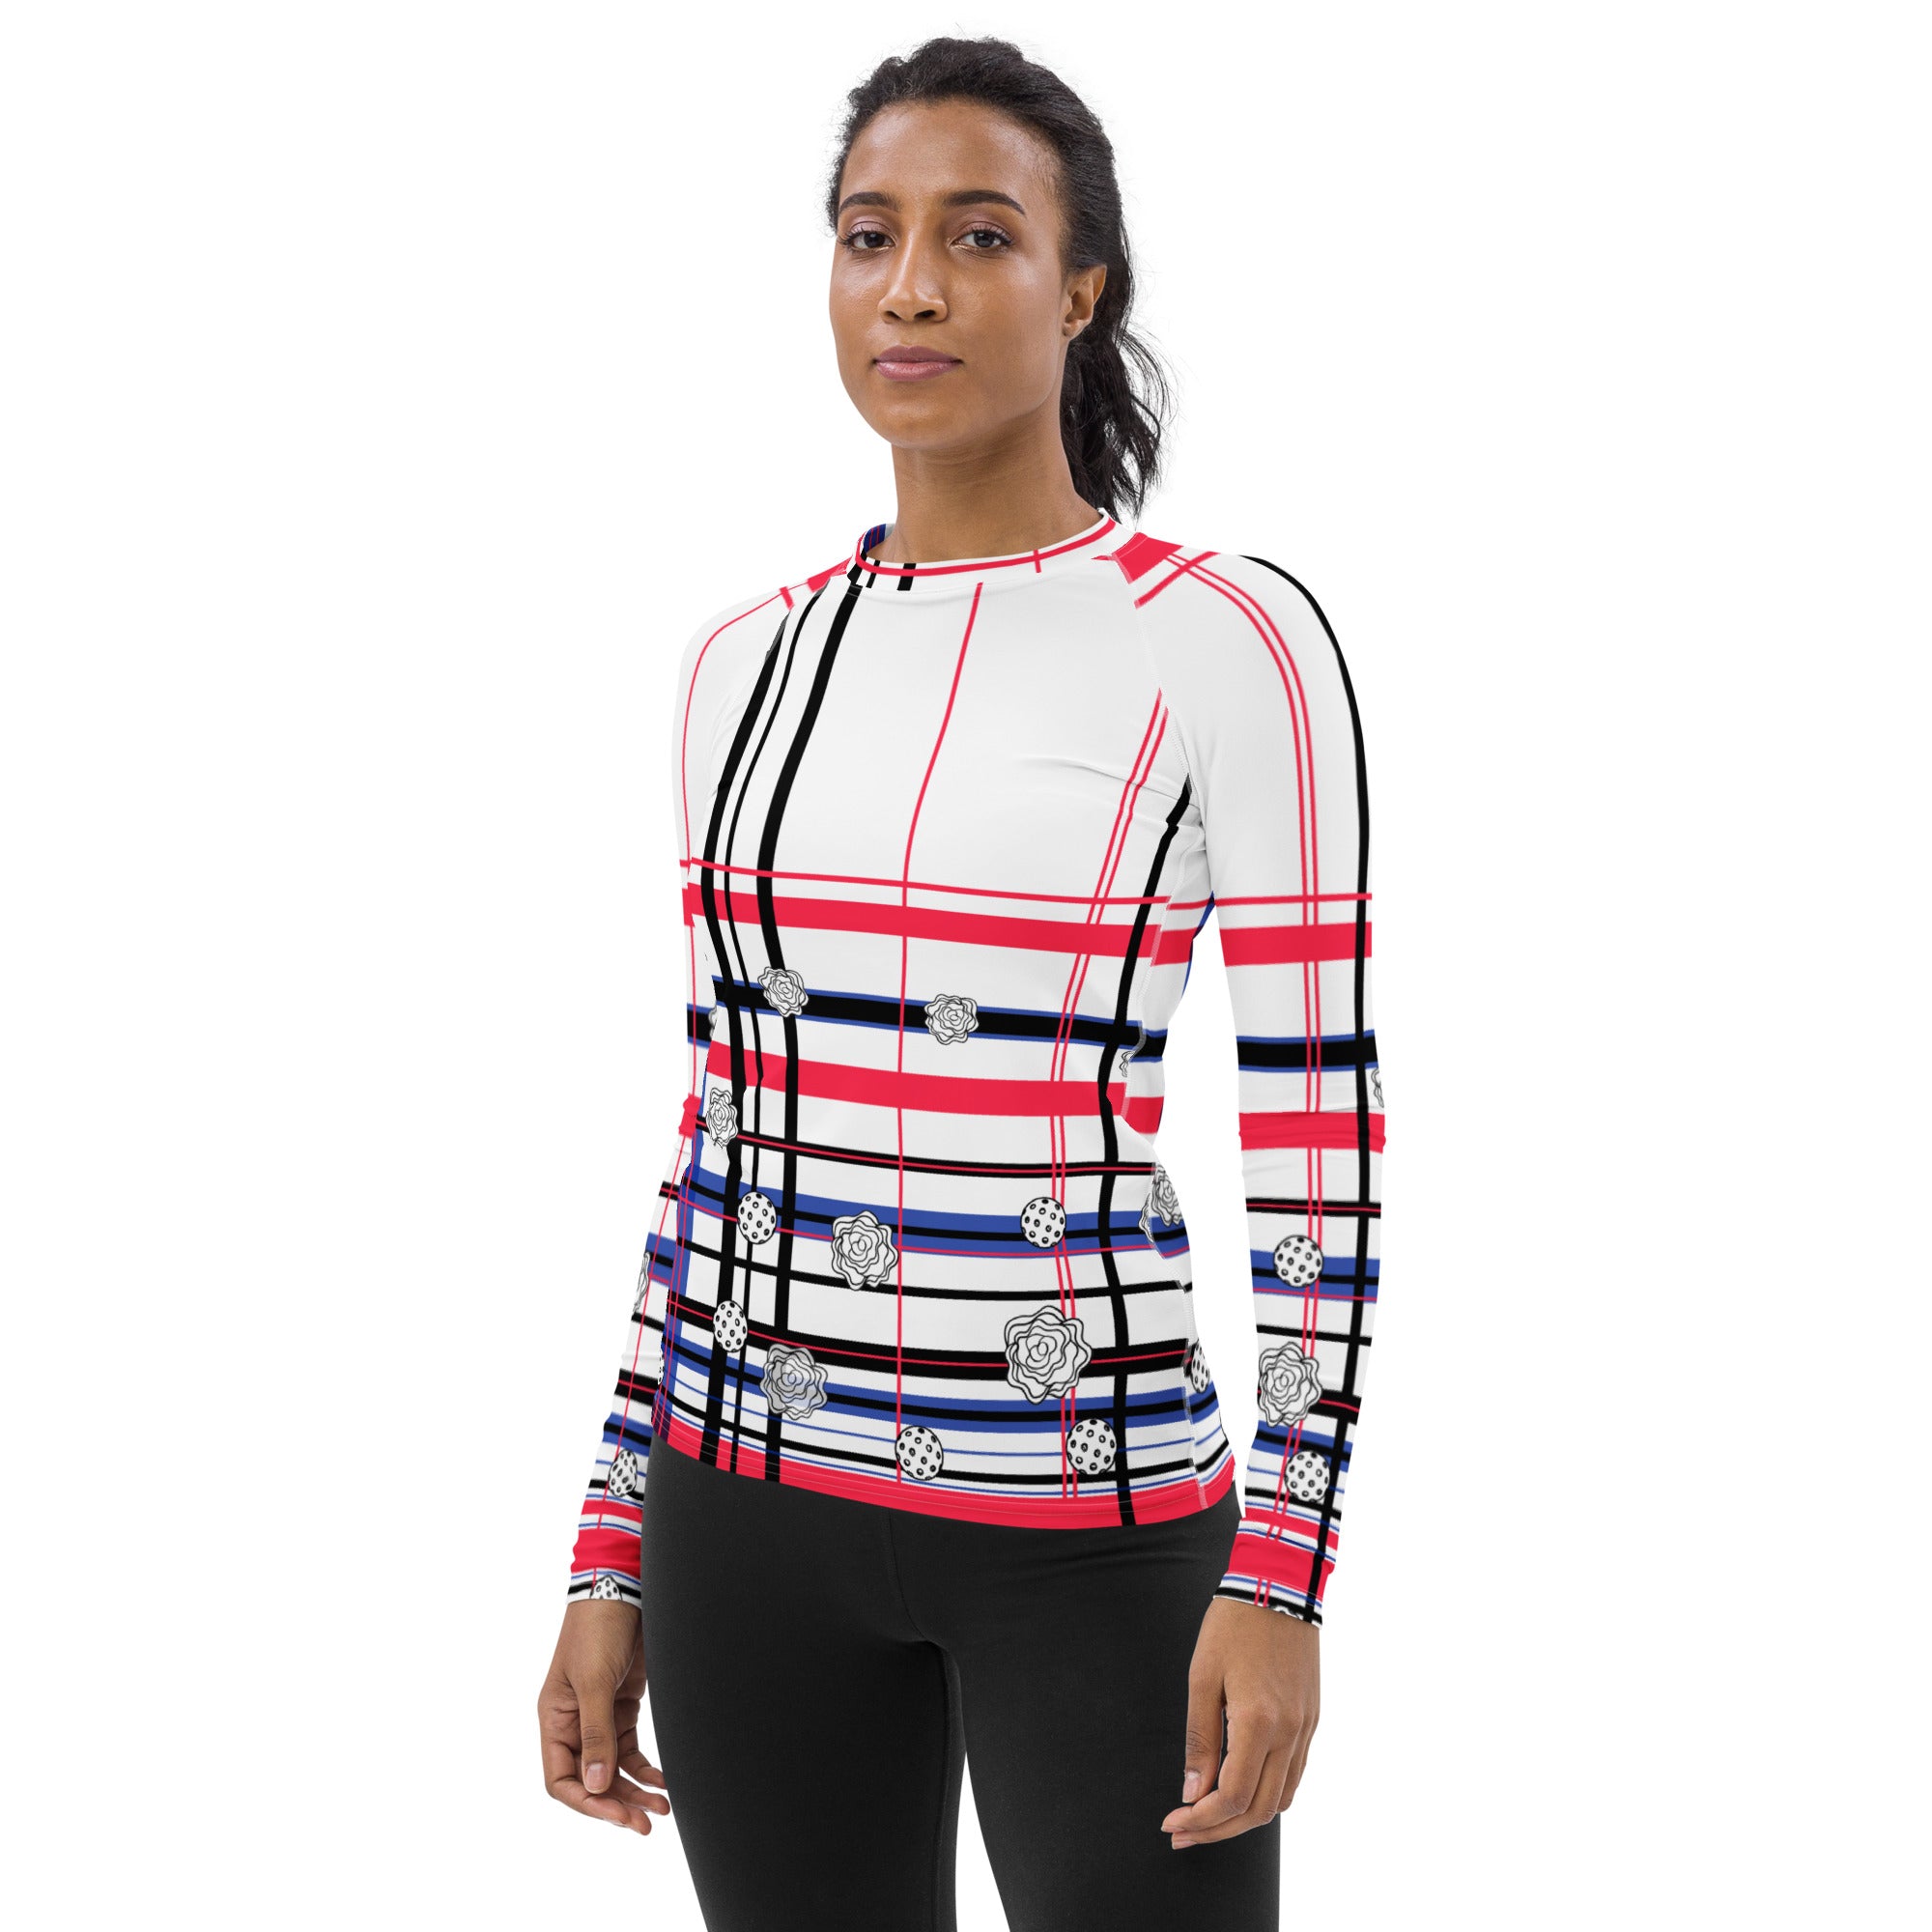 Got Pla(yed)id© Red, White & Blue Women's Performance Long Sleeve Shirt for Pickleball Enthusiasts, UPF 50+